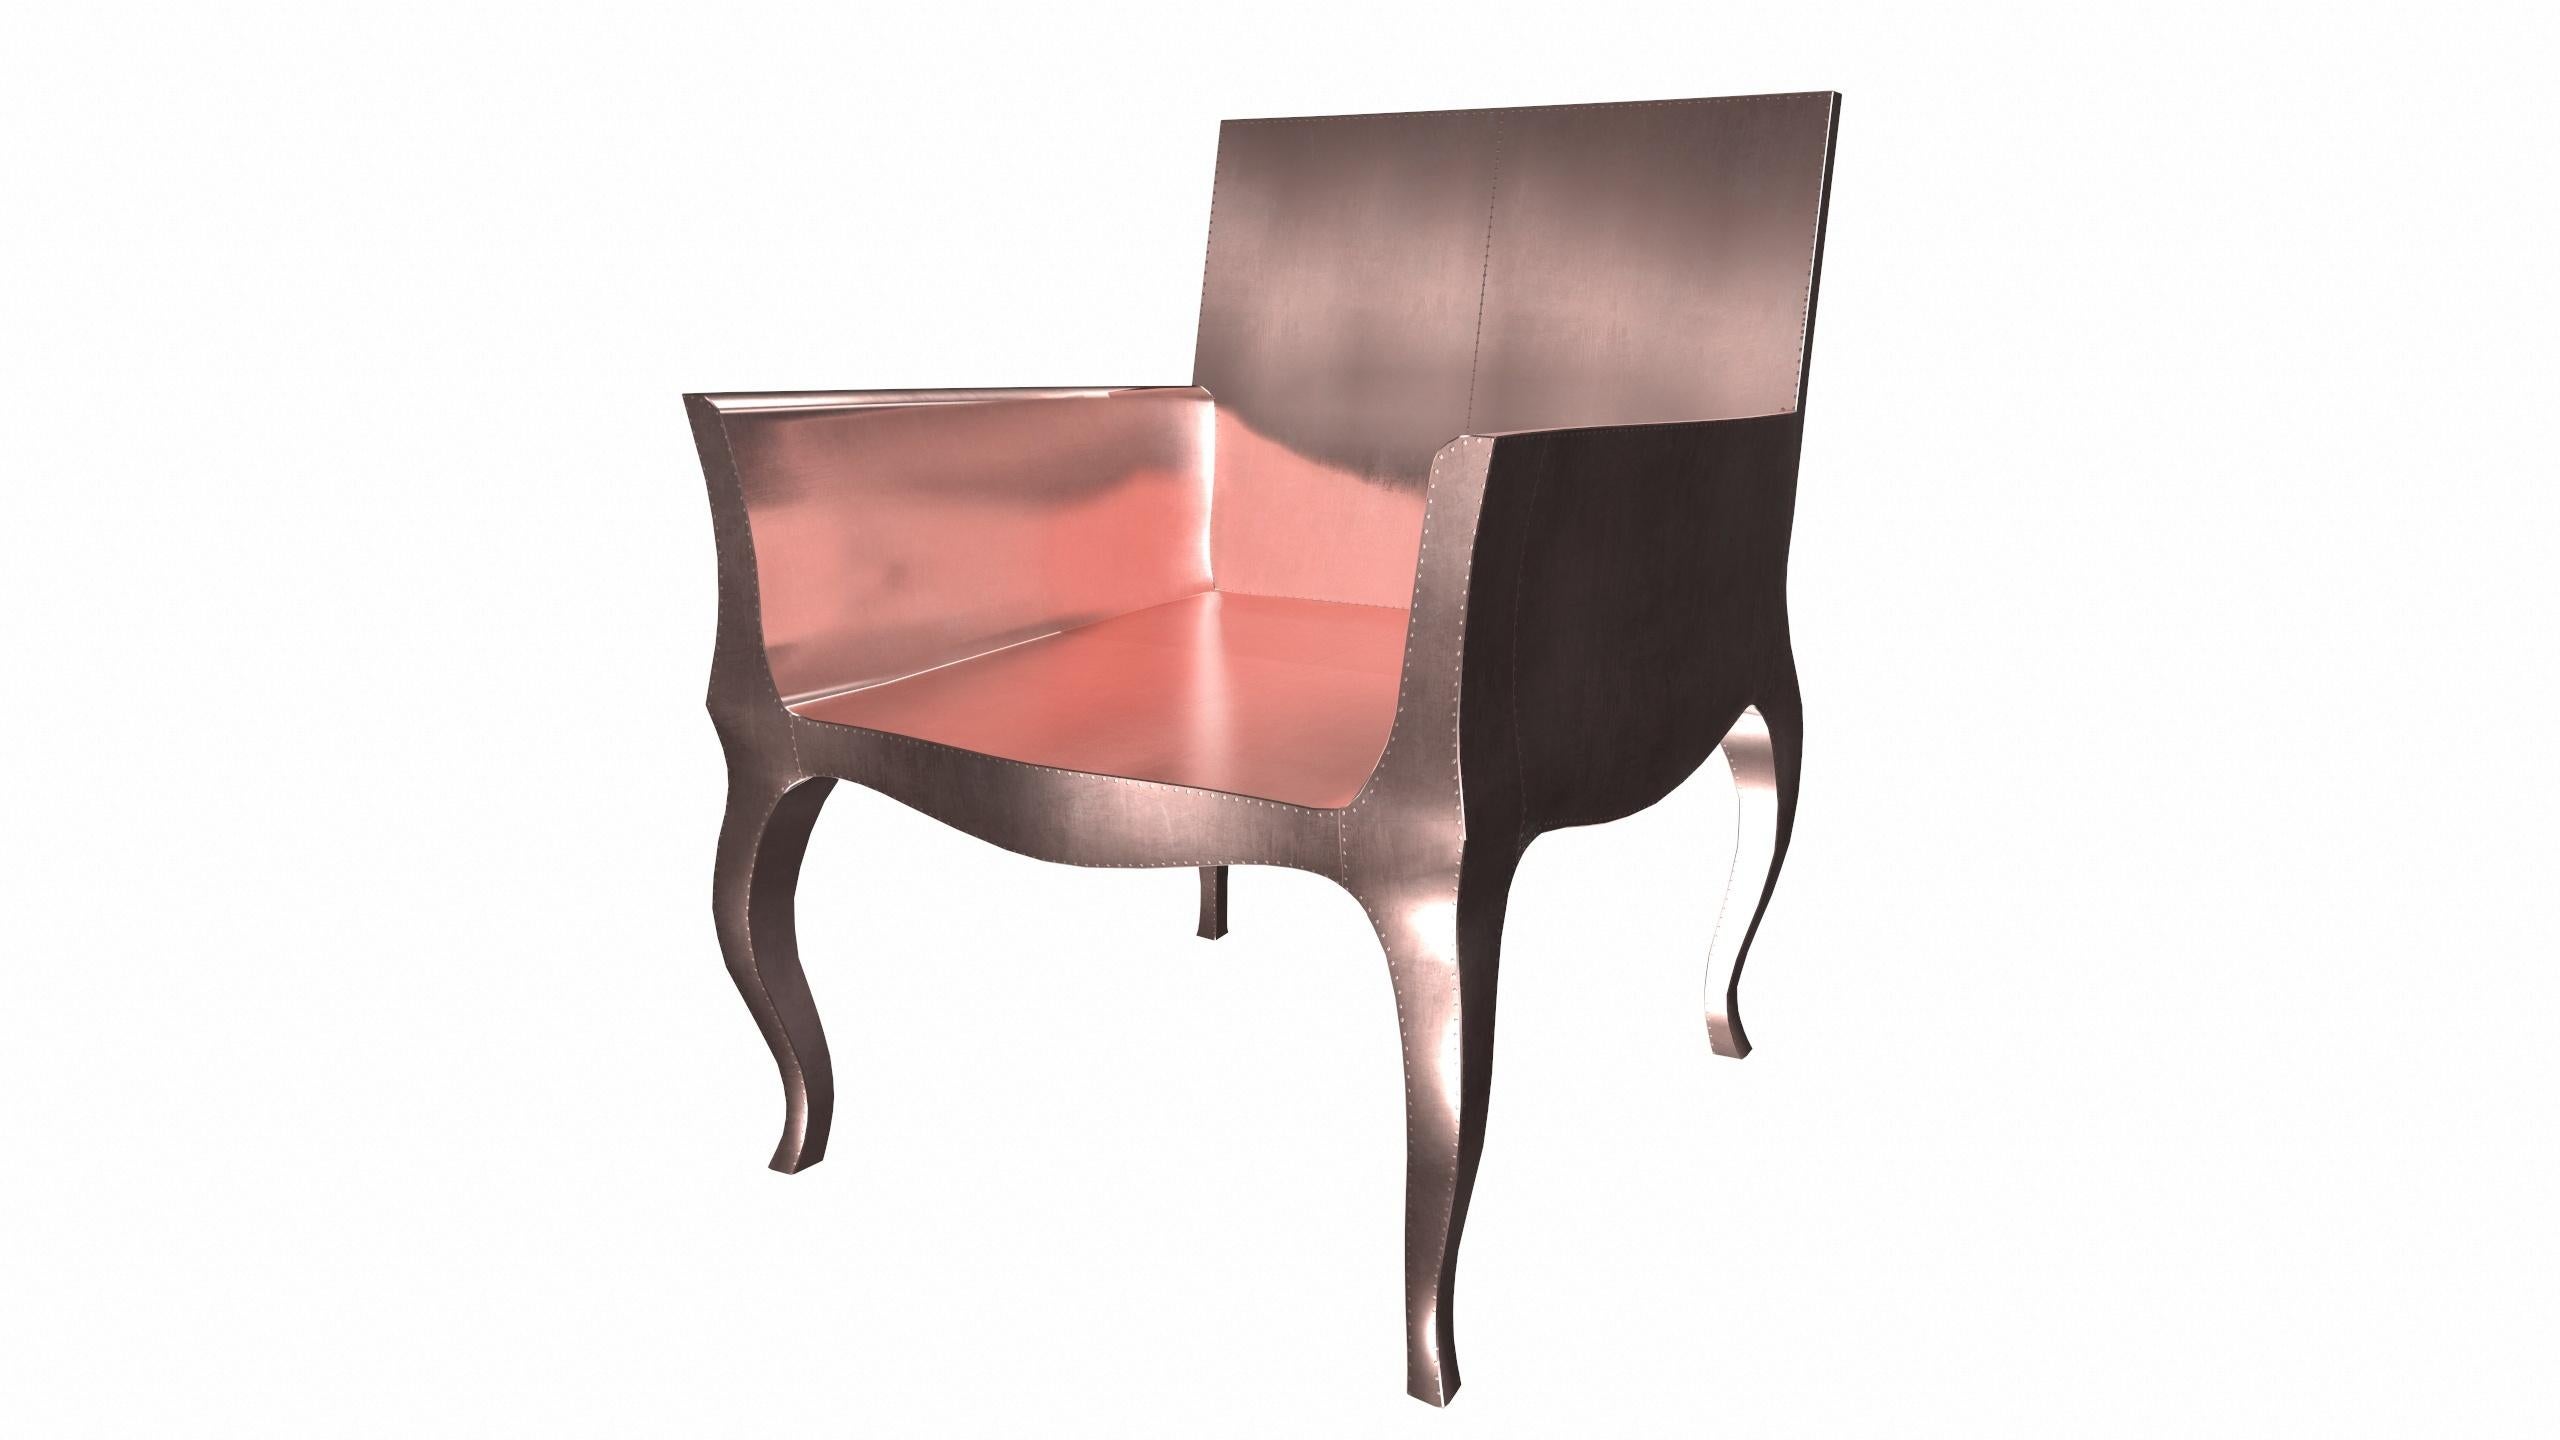 Contemporary Antique Art Deco Chairs Smooth Copper by Paul Mathieu for S. Odegard For Sale